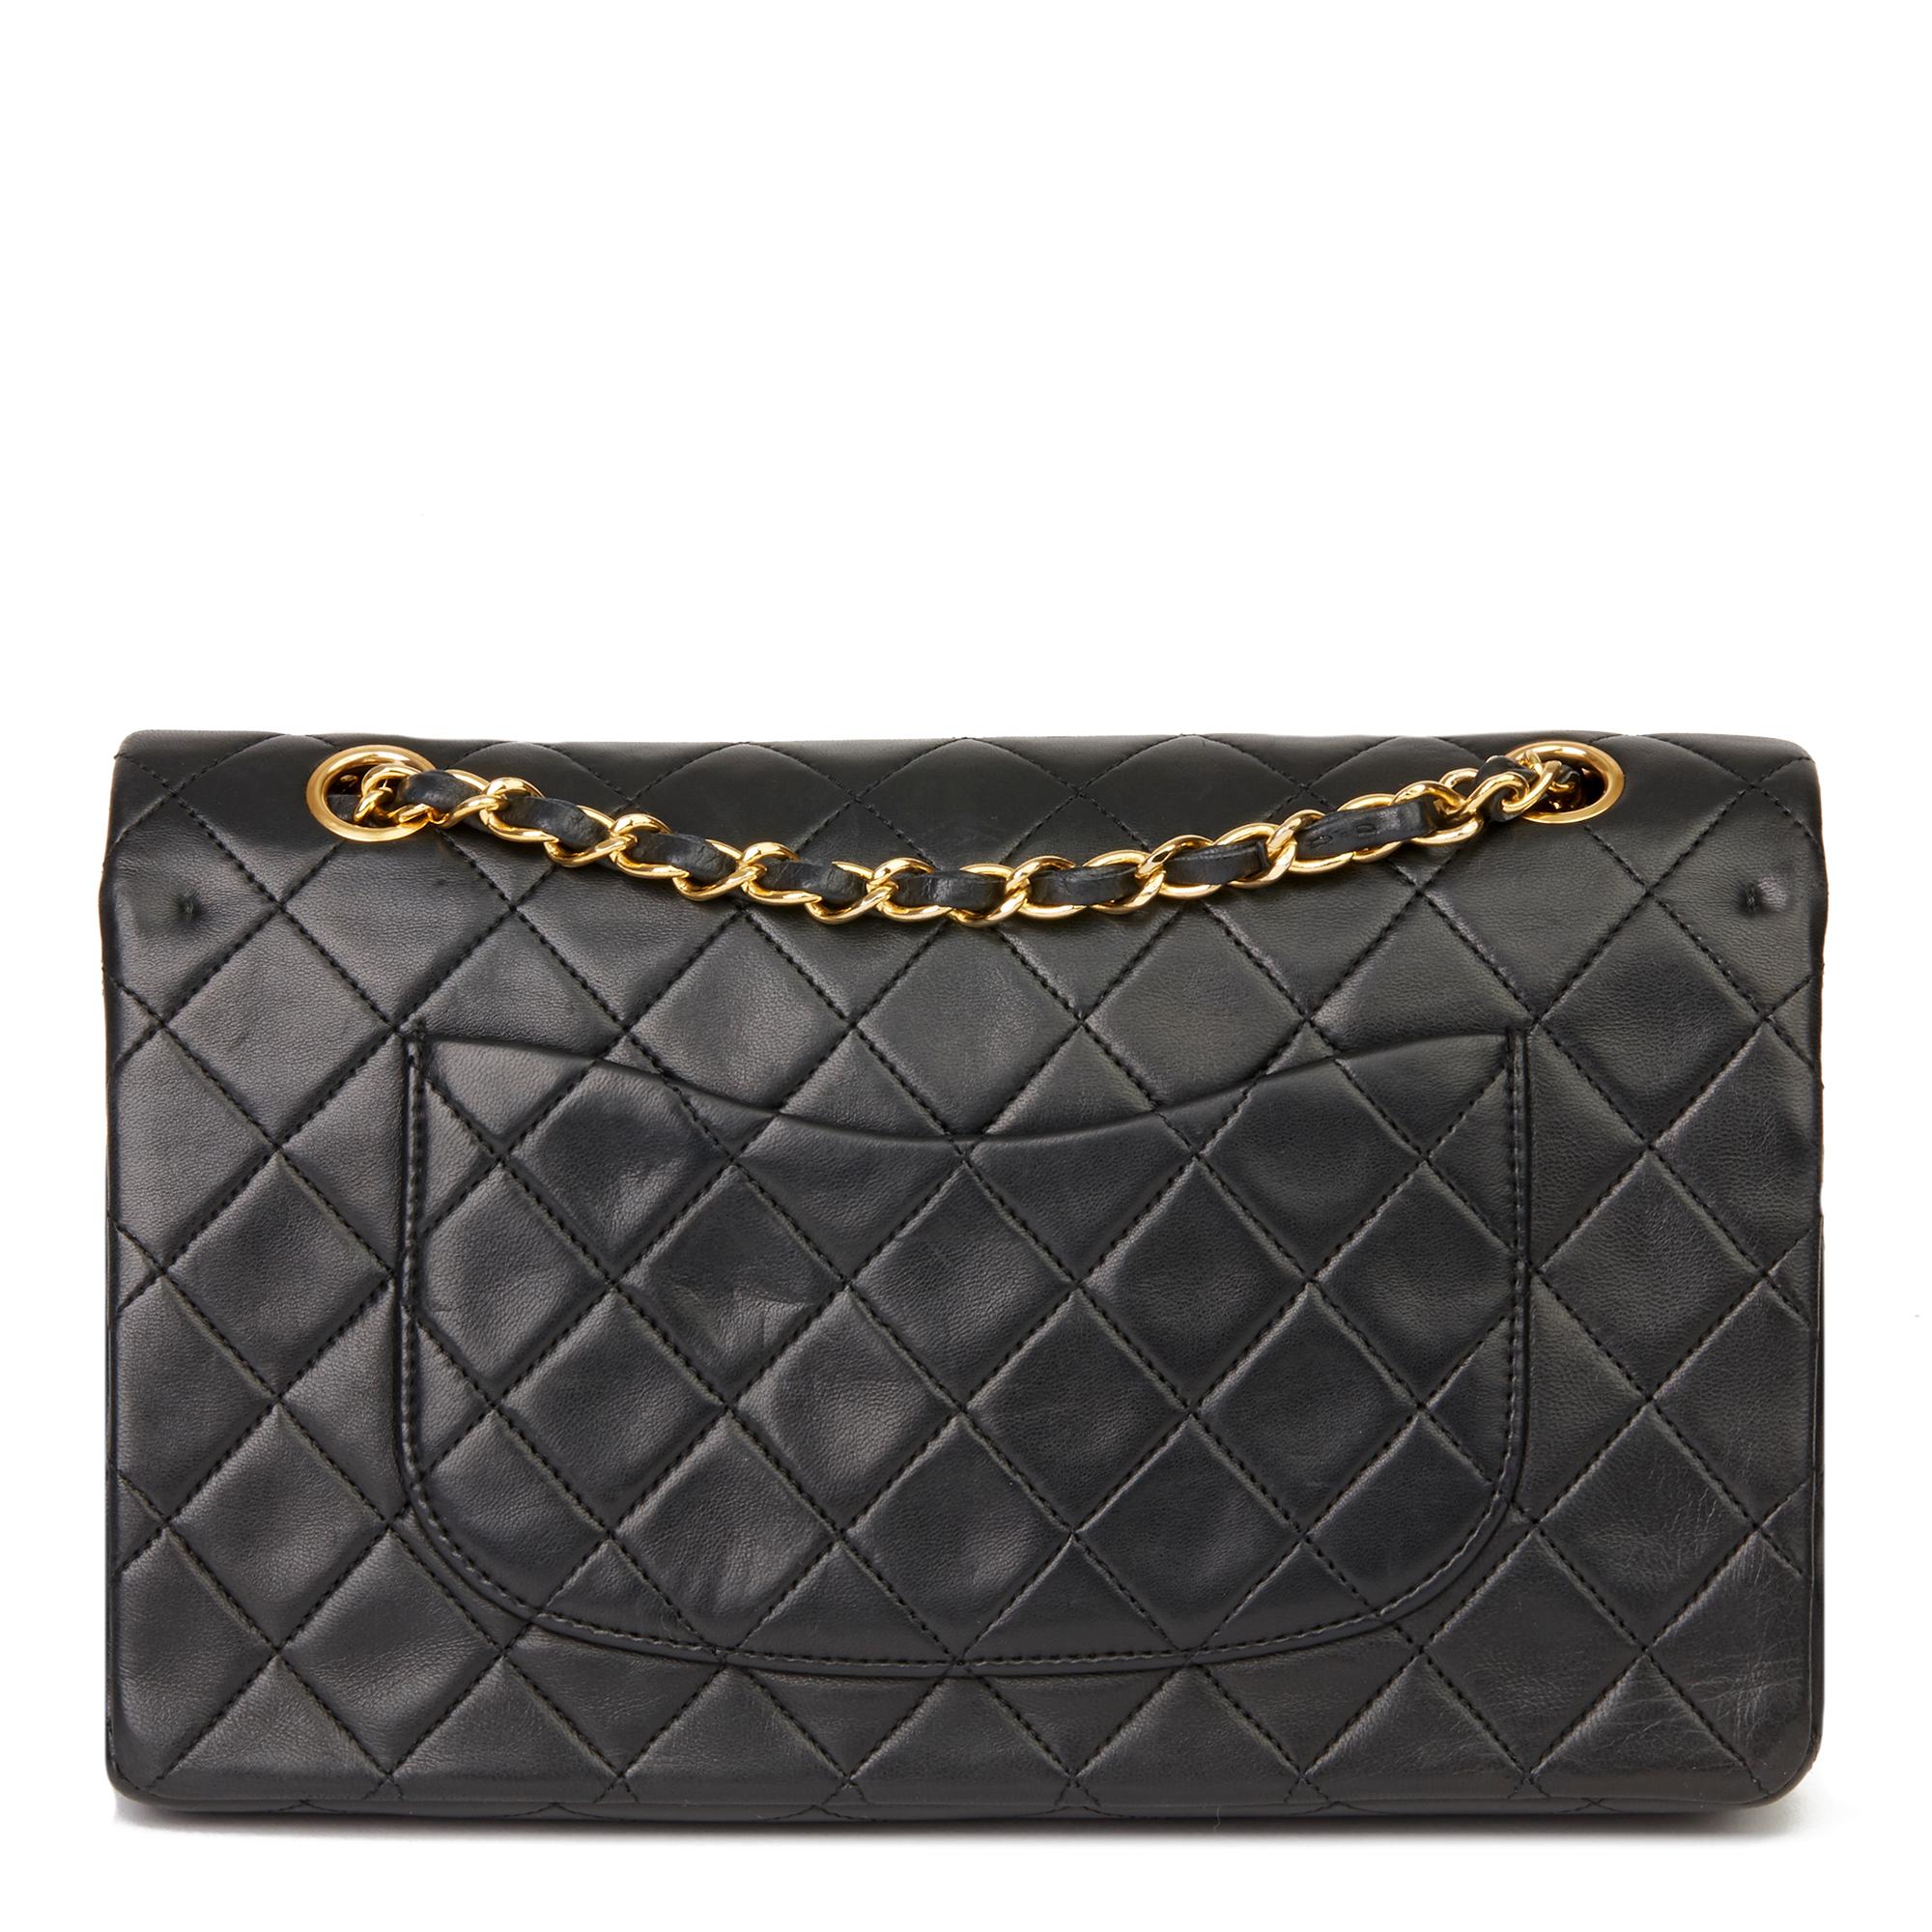 1991 Chanel Black Quilted Lambskin Vintage Medium Classic Double Flap Bag 1